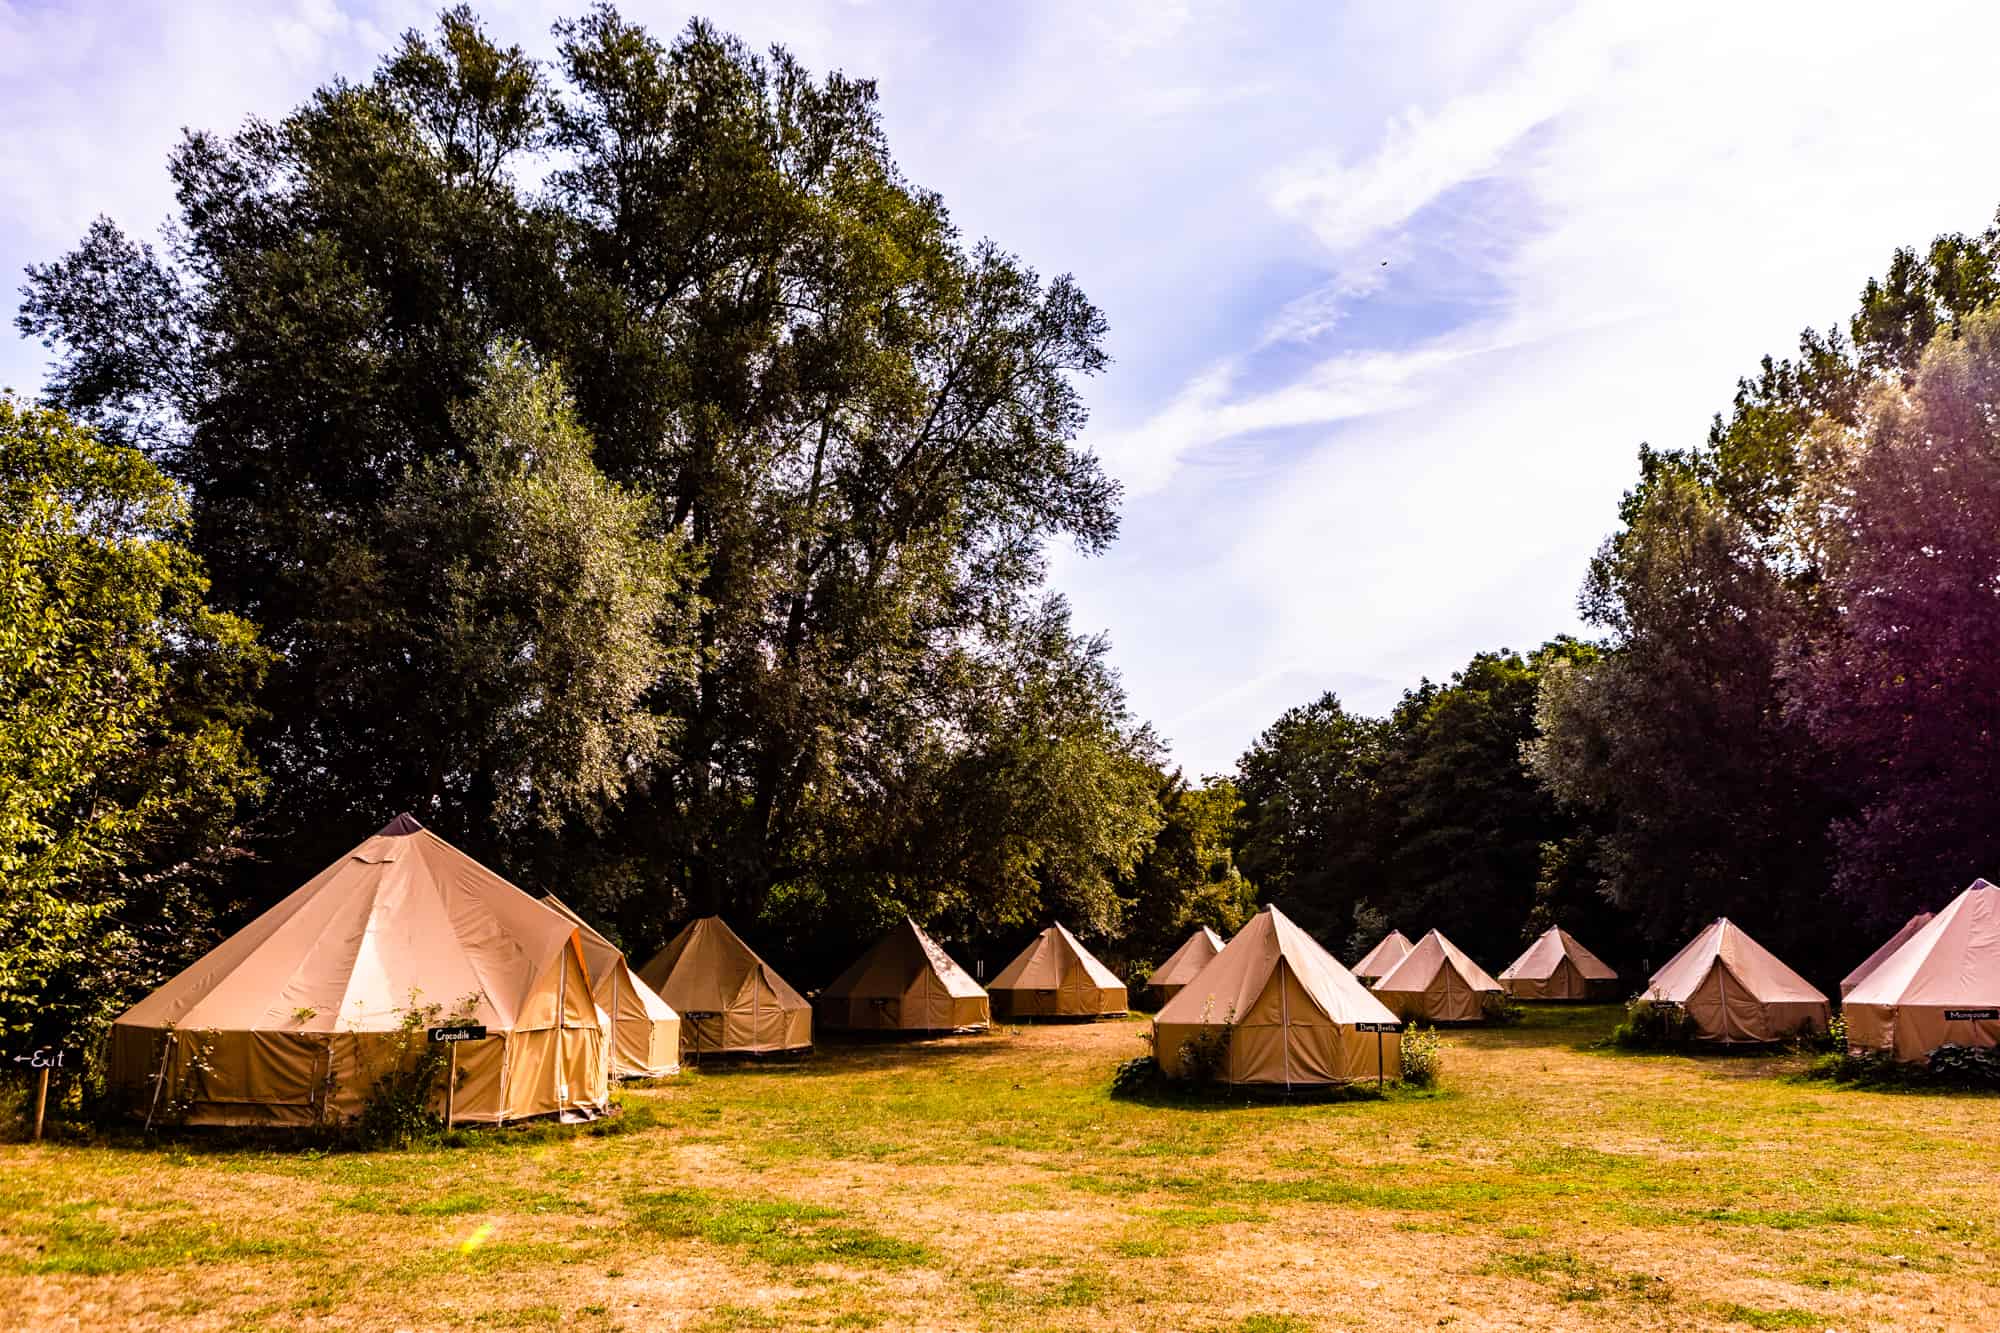 The accommodation tents at Chalkney Water Meadows